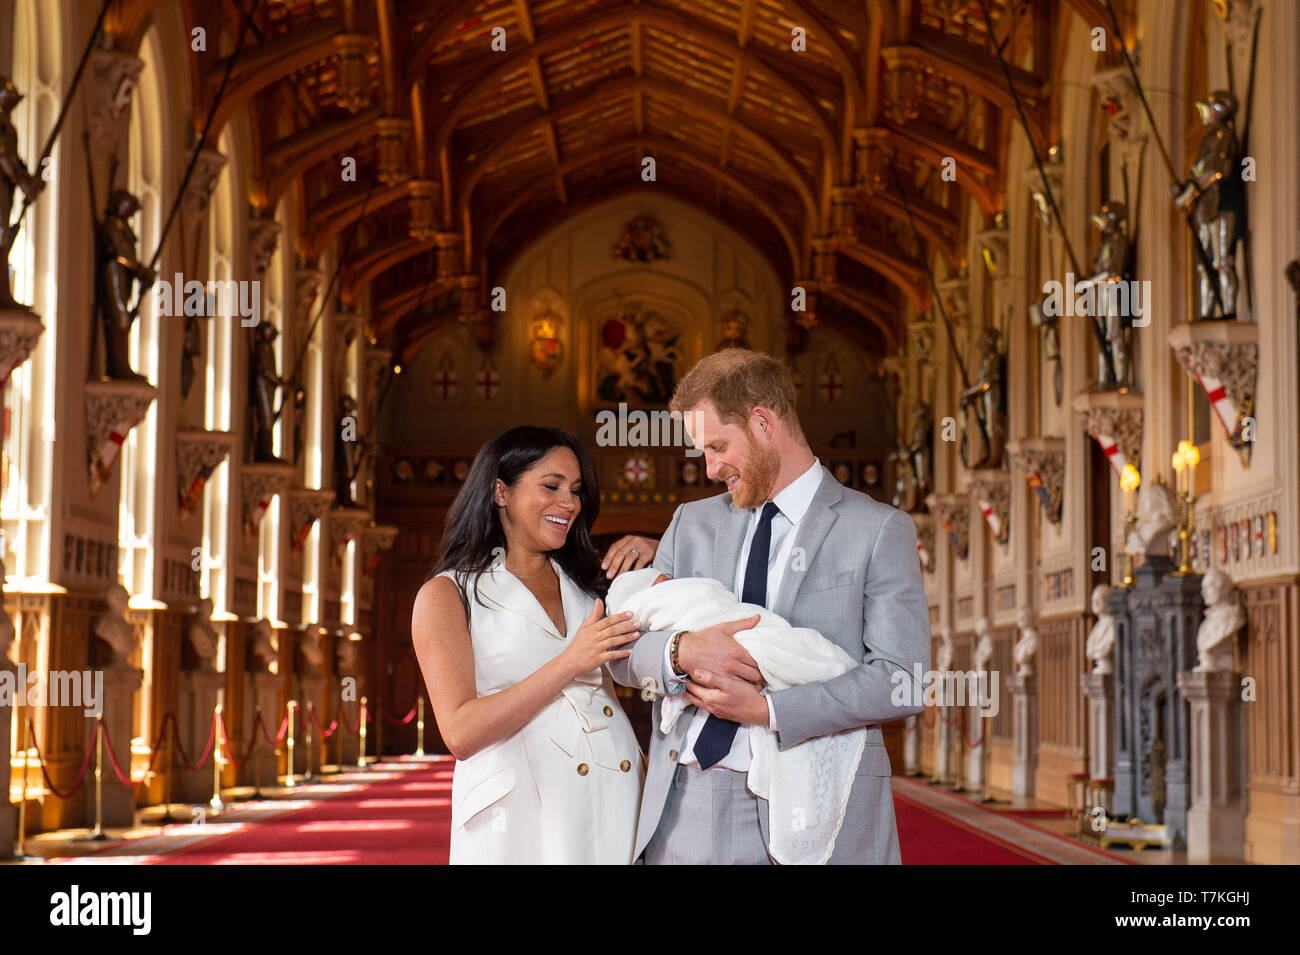 Windsor, Britain. 8th May, 2019. Britain's Prince Harry, Duke of Sussex (R), and his wife Meghan Markle, Duchess of Sussex, pose for a photo with their son in St George's Hall at Windsor Castle in Windsor, Britain, on May 8, 2019. The baby boy, who is Queen Elizabeth's eighth great-grandchild, is seventh in line to the throne, behind the Prince of Wales, the Duke of Cambridge and his children - Prince George, Princess Charlotte and Prince Louis - and Prince Harry. Credit: Dominic Lipinski/PA Wire/Xinhua/Alamy Live News Stock Photo